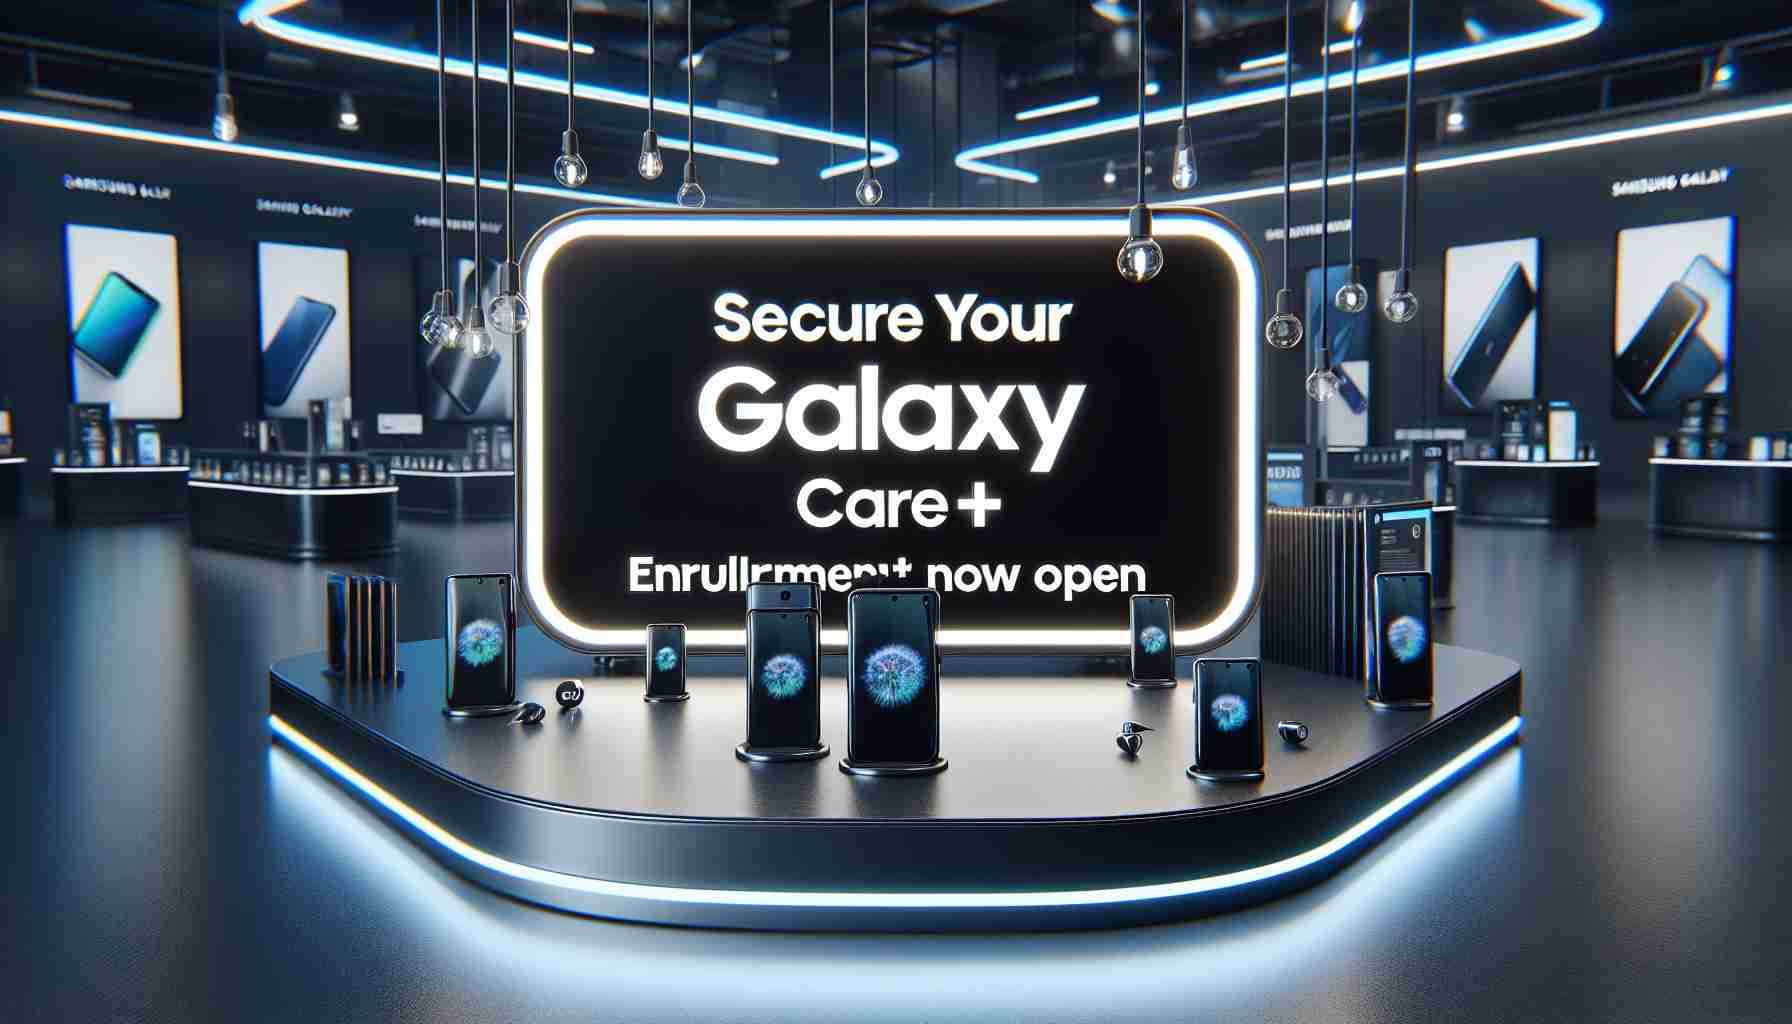 Secure Your Galaxy: Samsung Care+ Enrollment Now Open